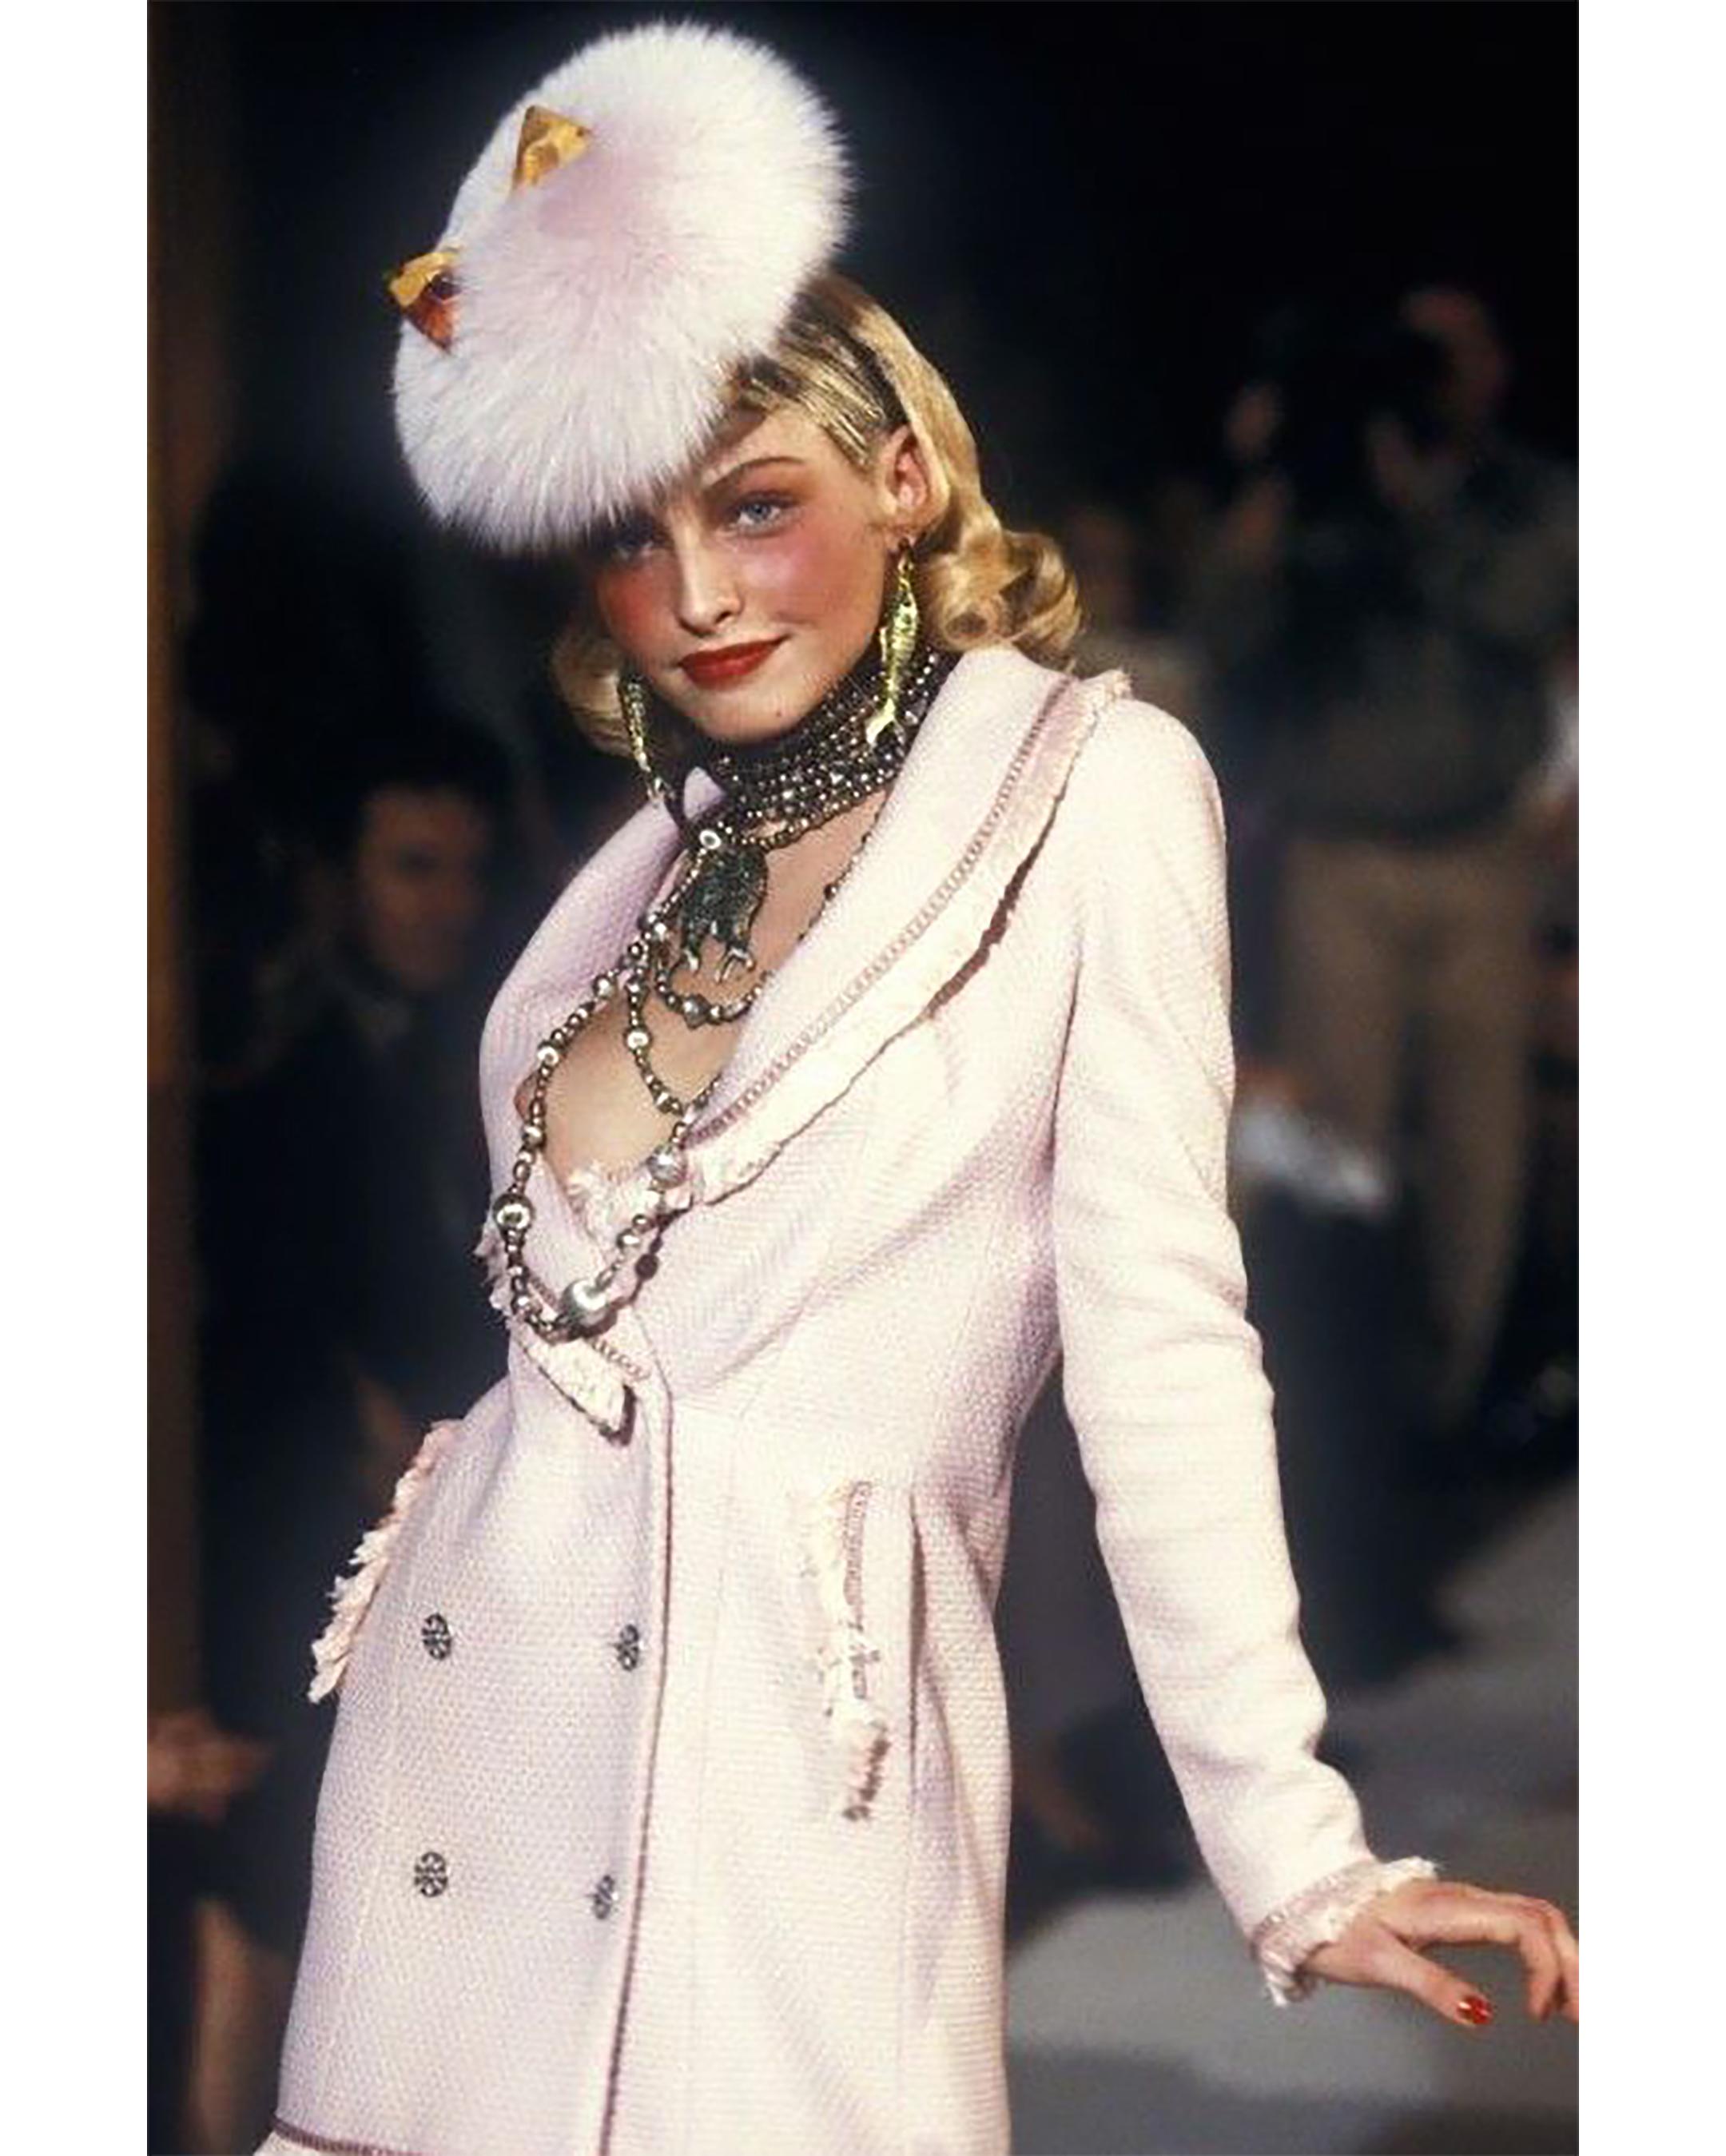 A/W 1997 Christian Dior by John Galliano pink boucle double-breasted mini blazer dress. Baby pink jacket with pale pink fringe trim and silver tone floral buttons. Can be styled as dress or blazer depending on desired effect. As seen on the runway